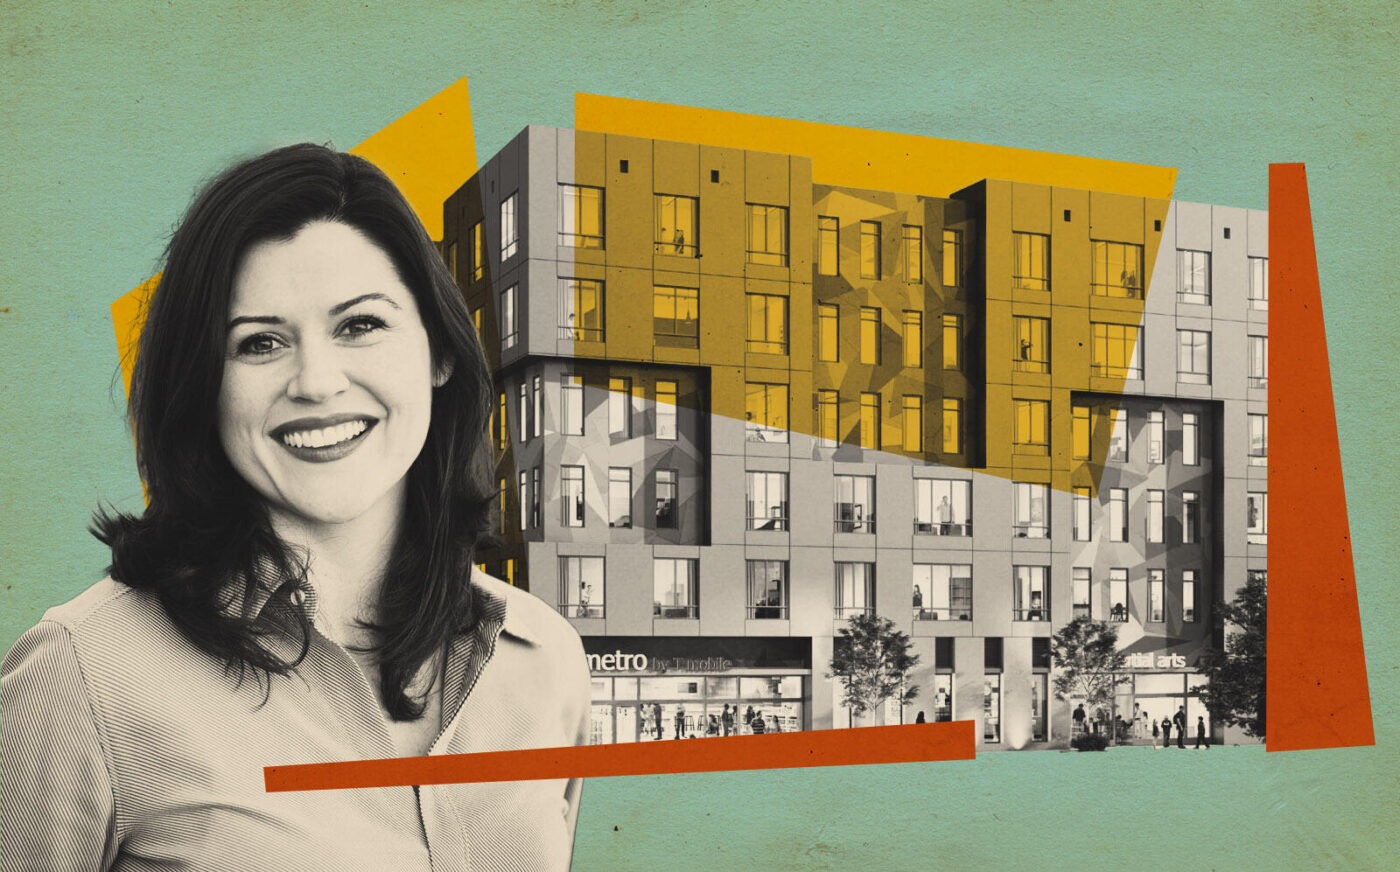 Oakbrook Partners' Elizabeth Brady and 3751 International Boulevard, Oakland (Illustration by Kevin Cifuentes for The Real Deal with Getty Images, Oakbrook Partners, KTGY)